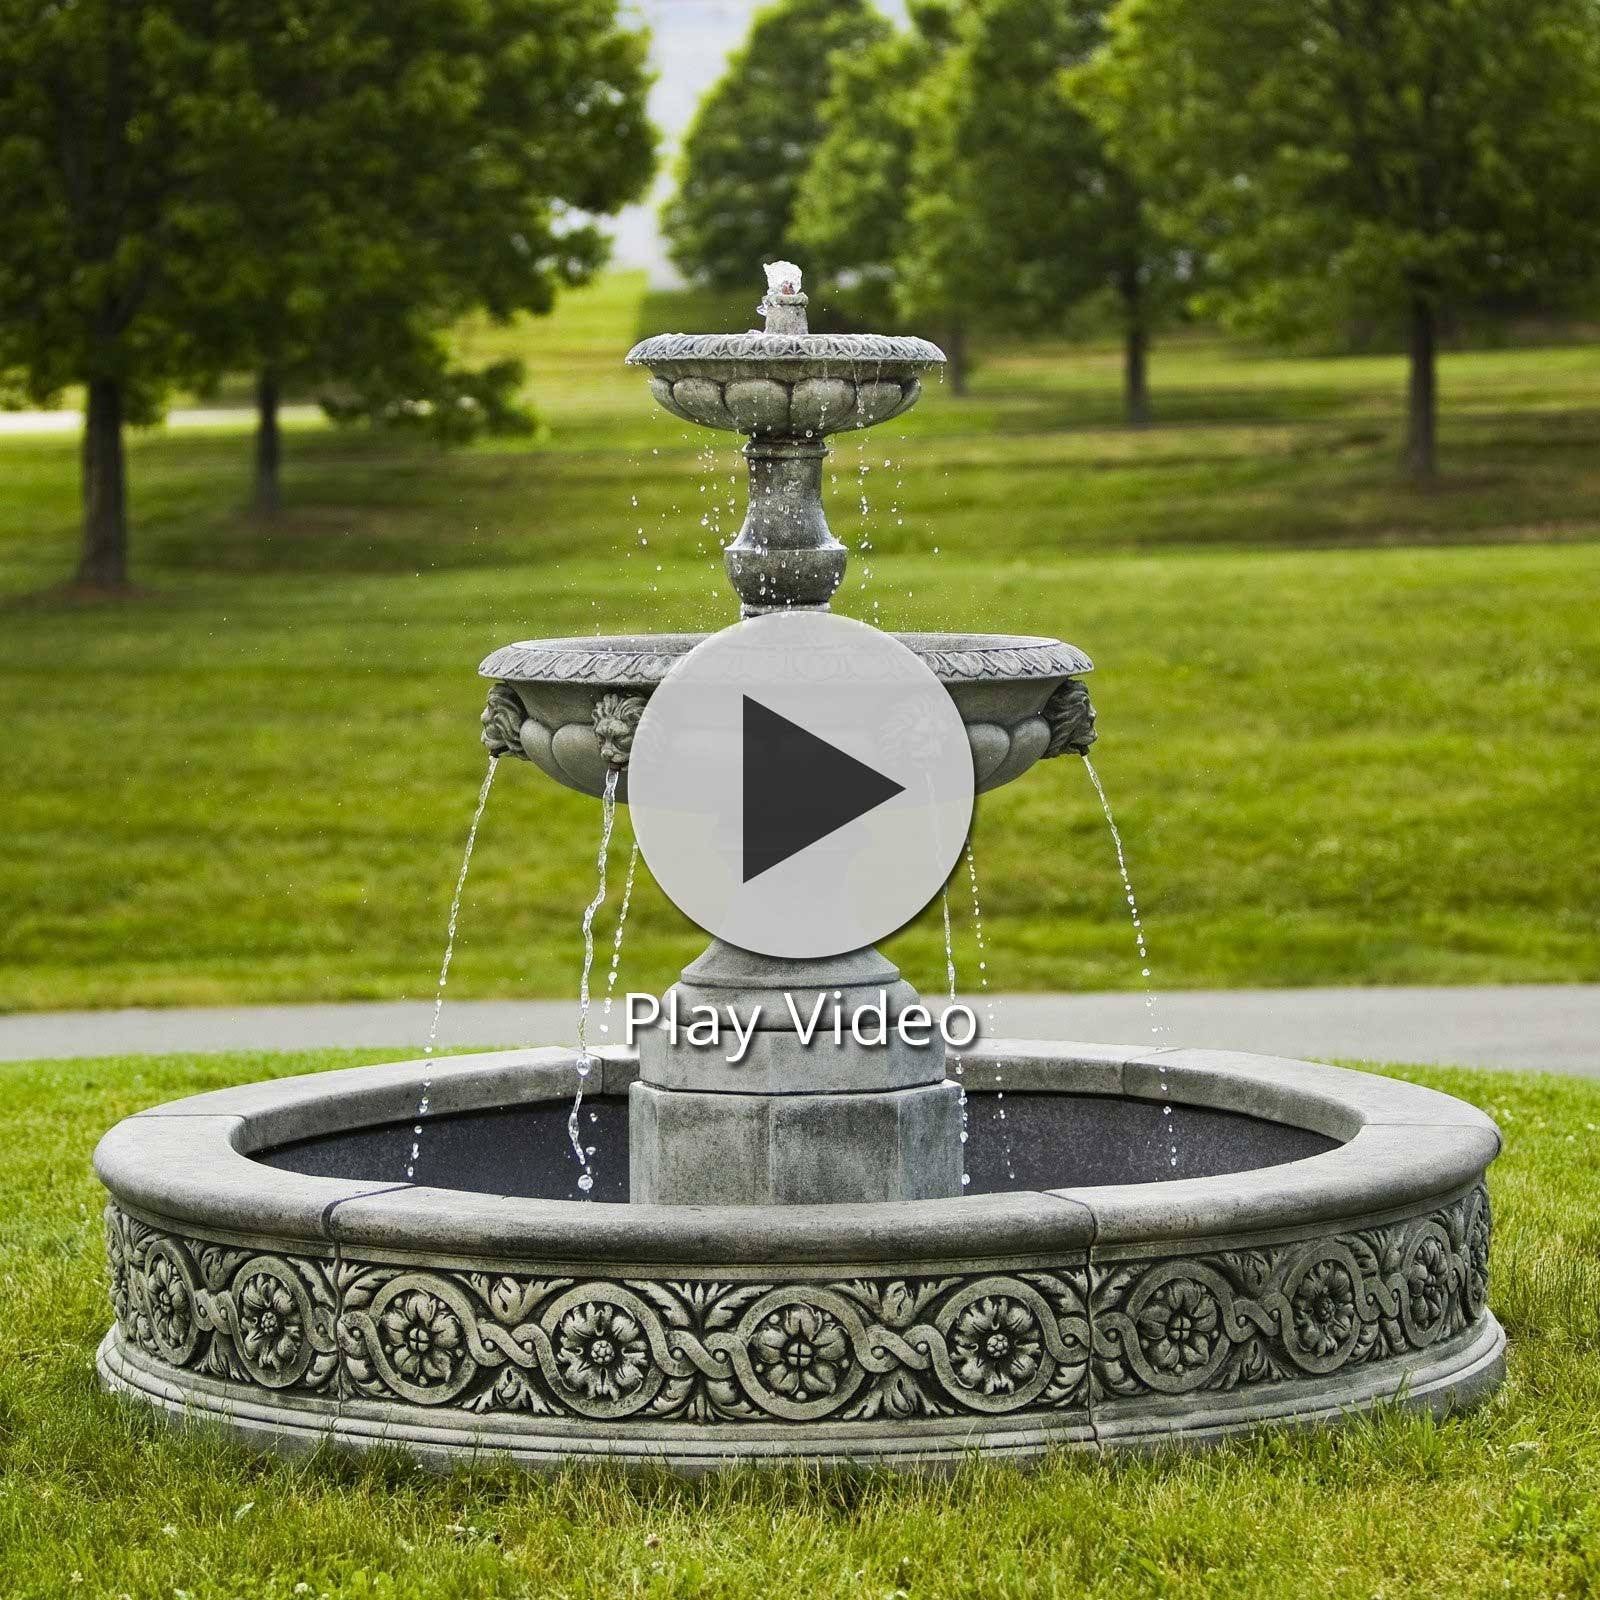 Parisienne Two Tier Outdoor Water Fountain